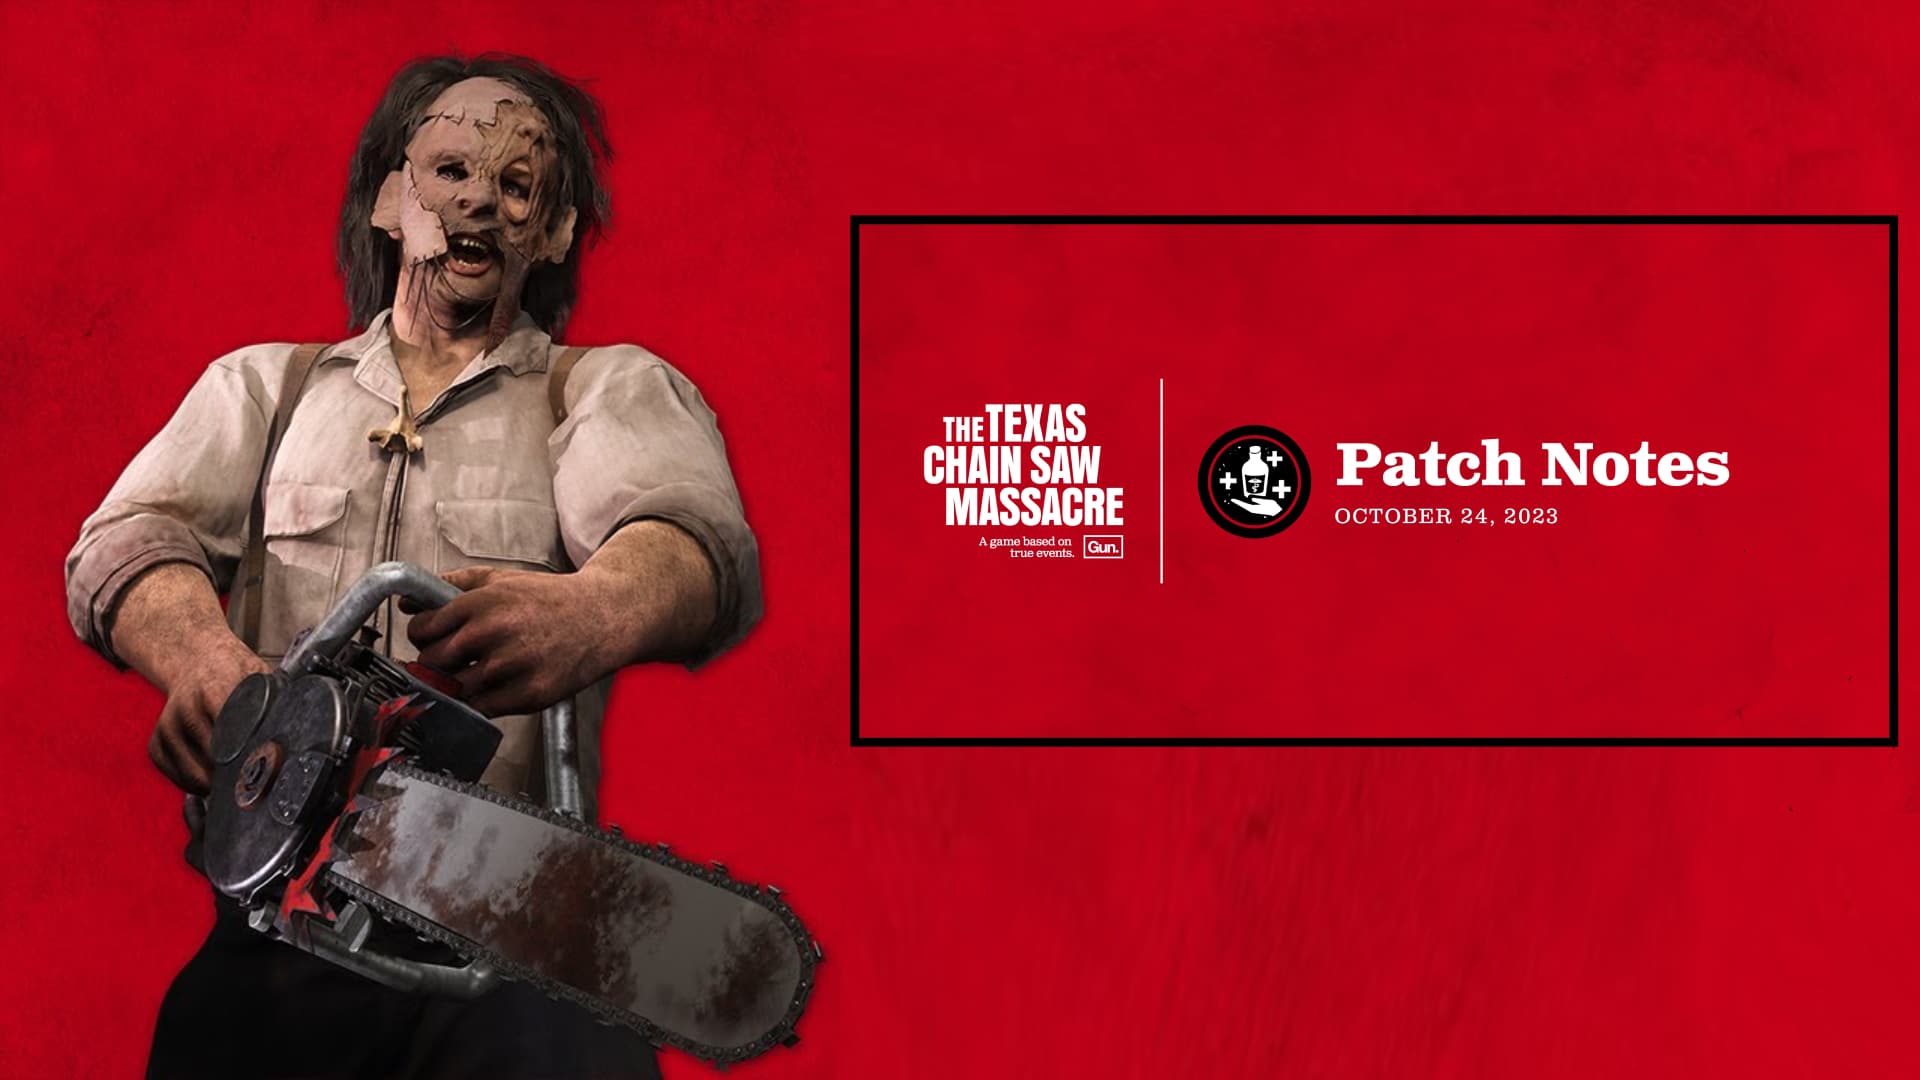 Texas Chainsaw Massacre Update 1.07 for October 24